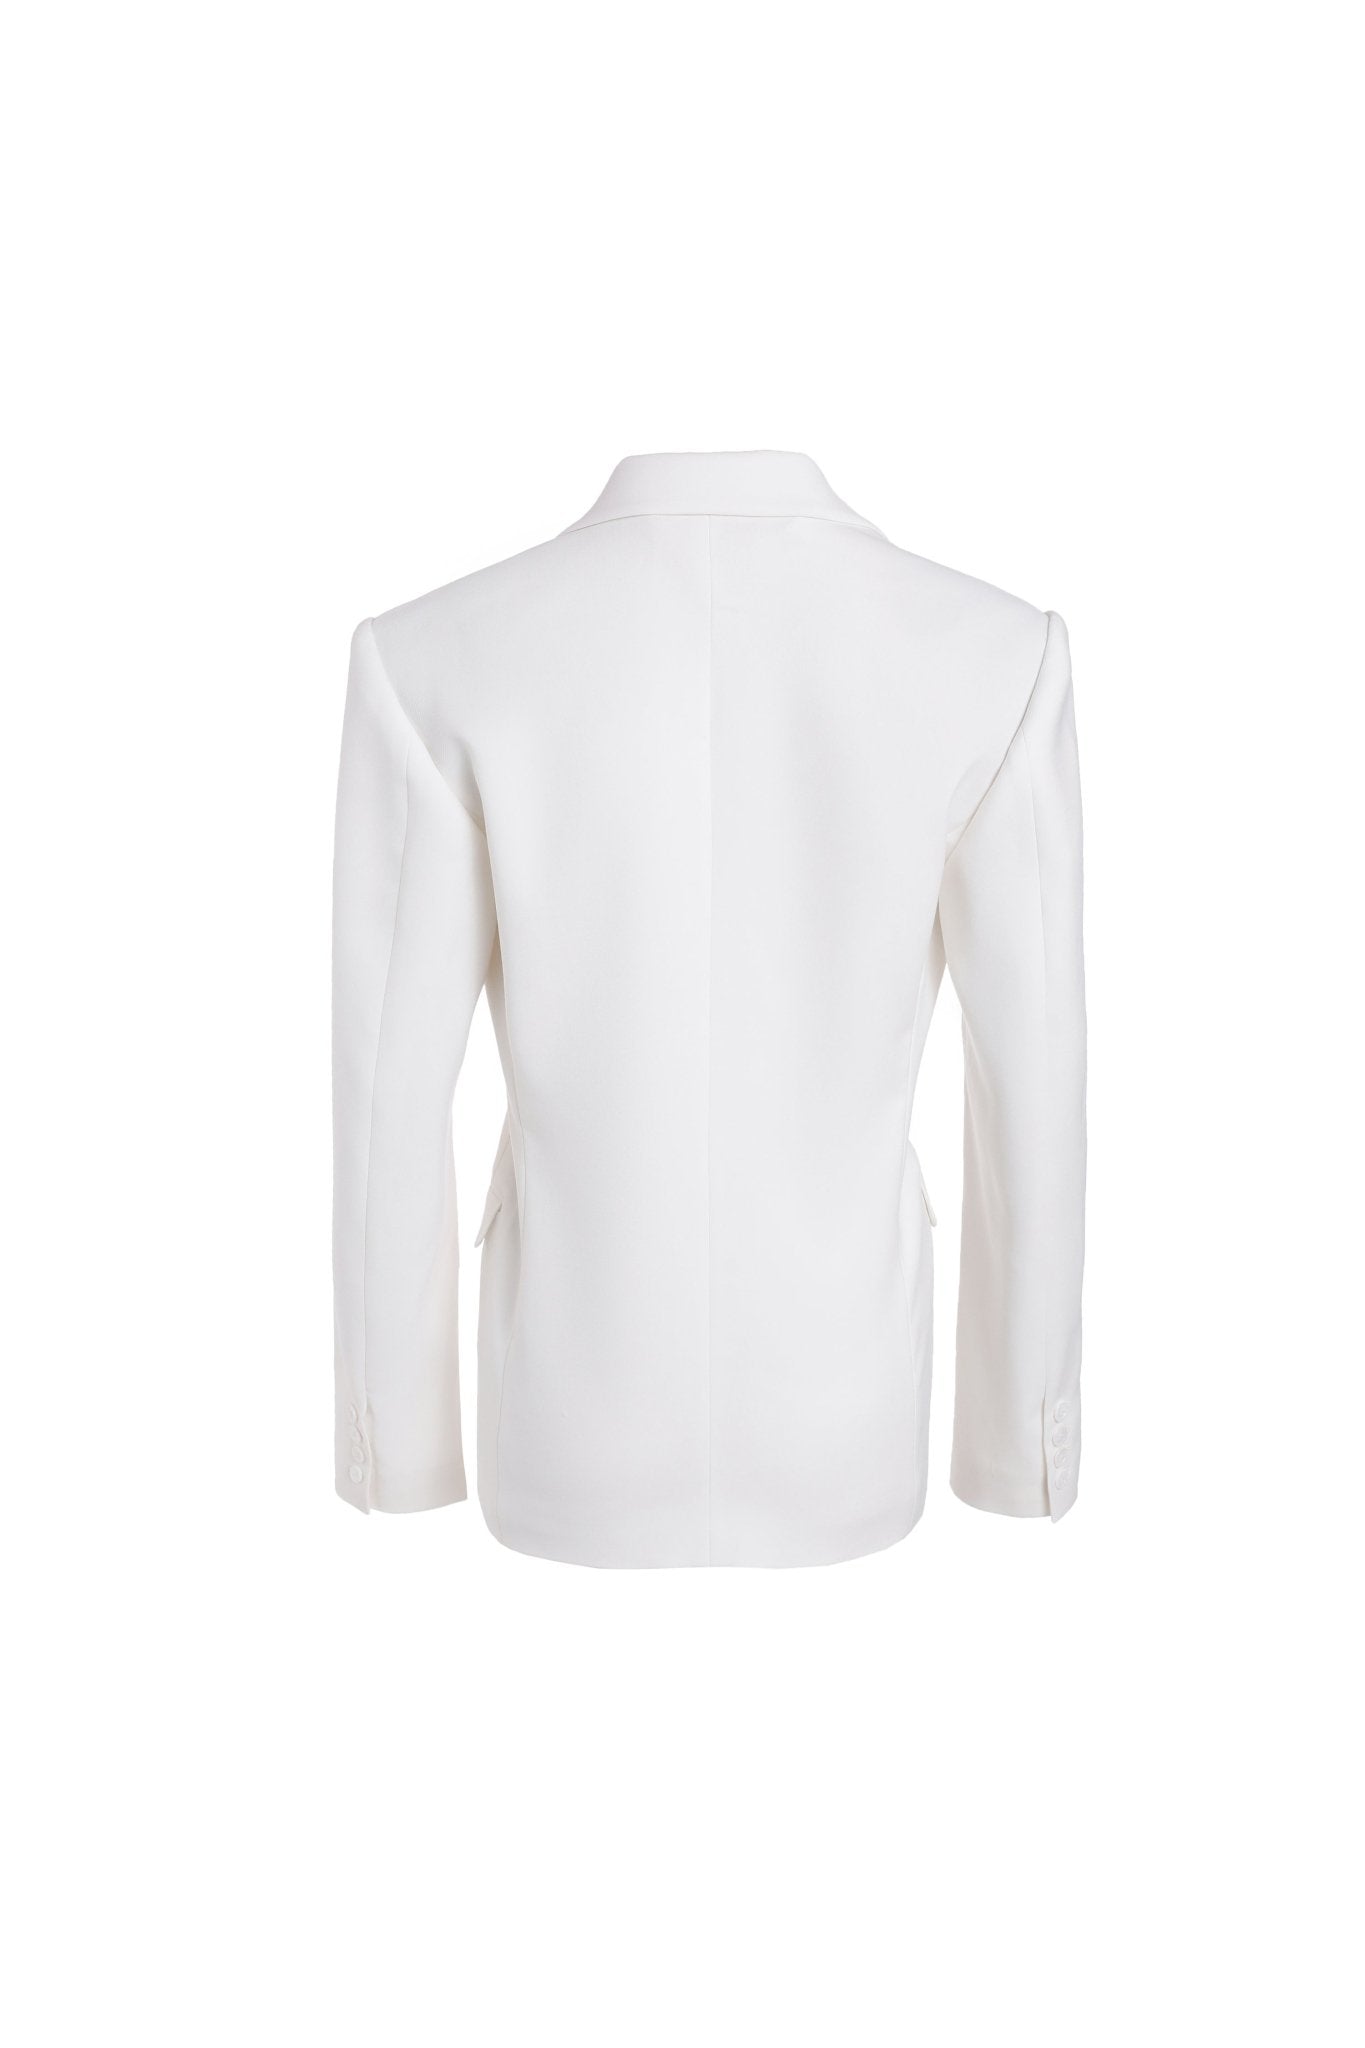 GROUP THERAPY White Wool Slim Fit Suit | MADA IN CHINA